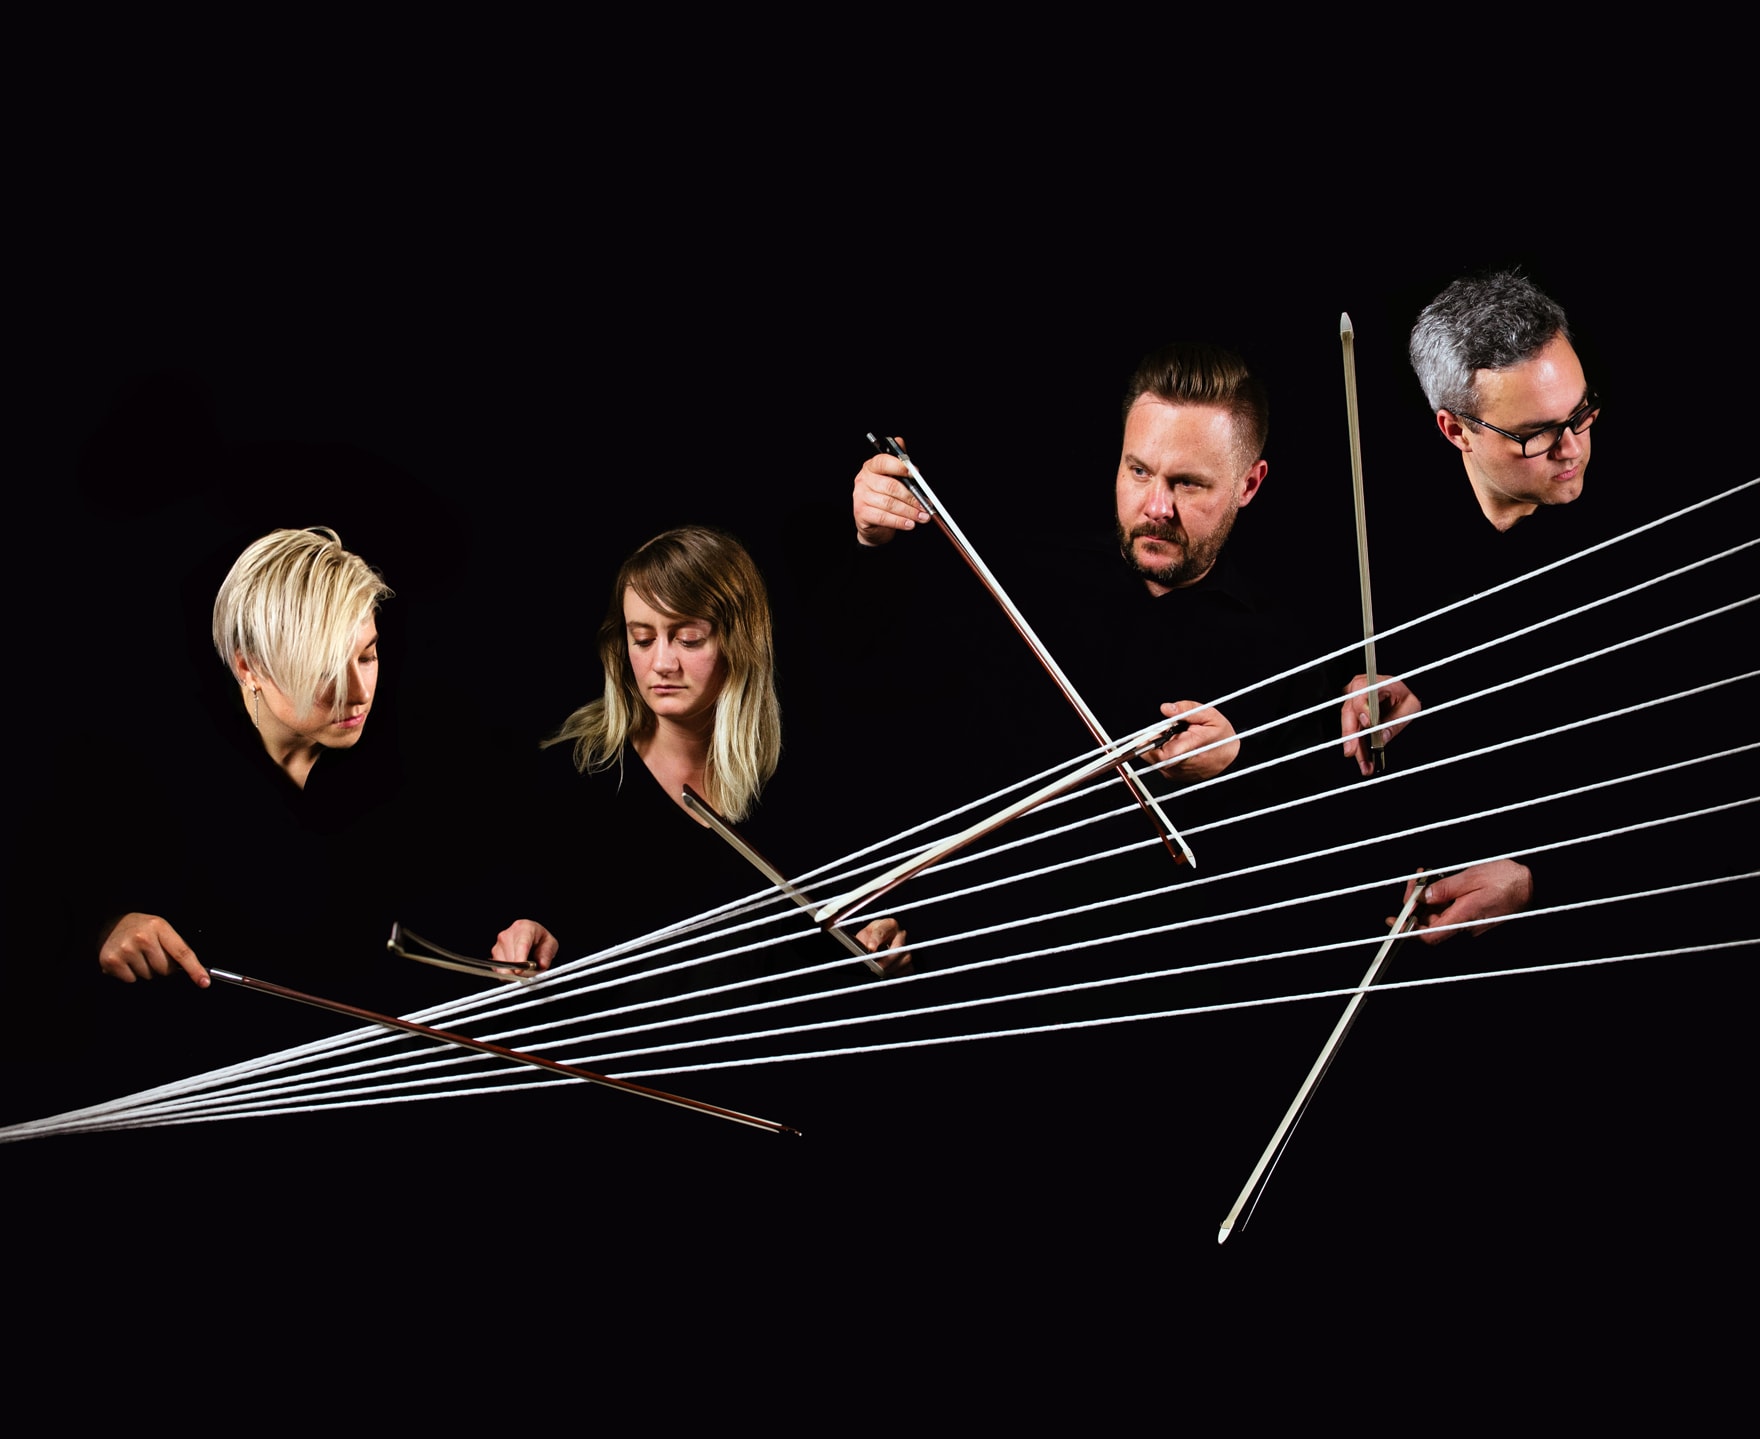 4 members of Spektral Quartet hold up their bows against lines that form a spectrum